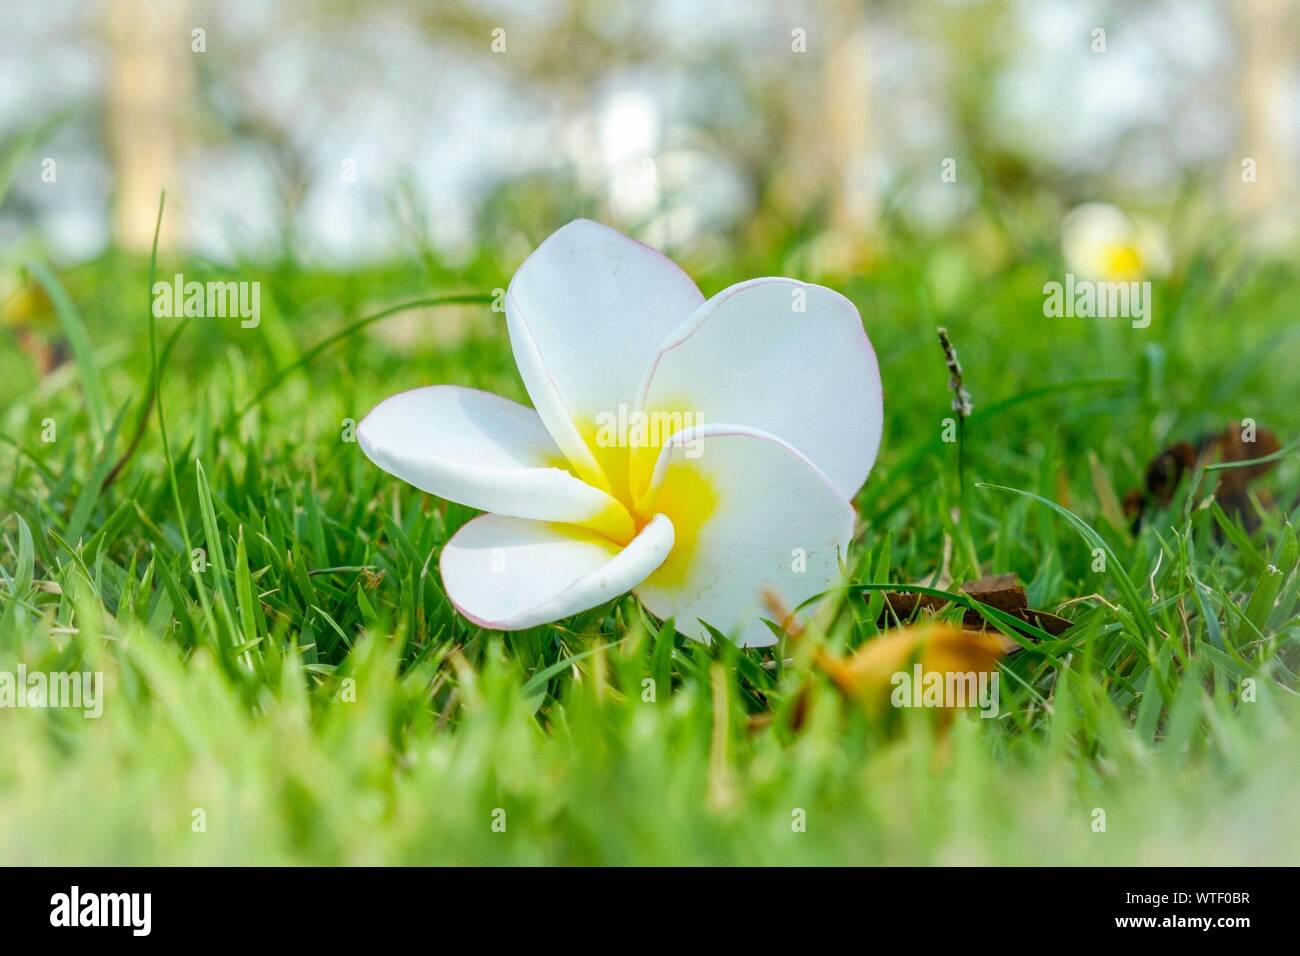 Close-up Of White Flower And Grass Stock Photo